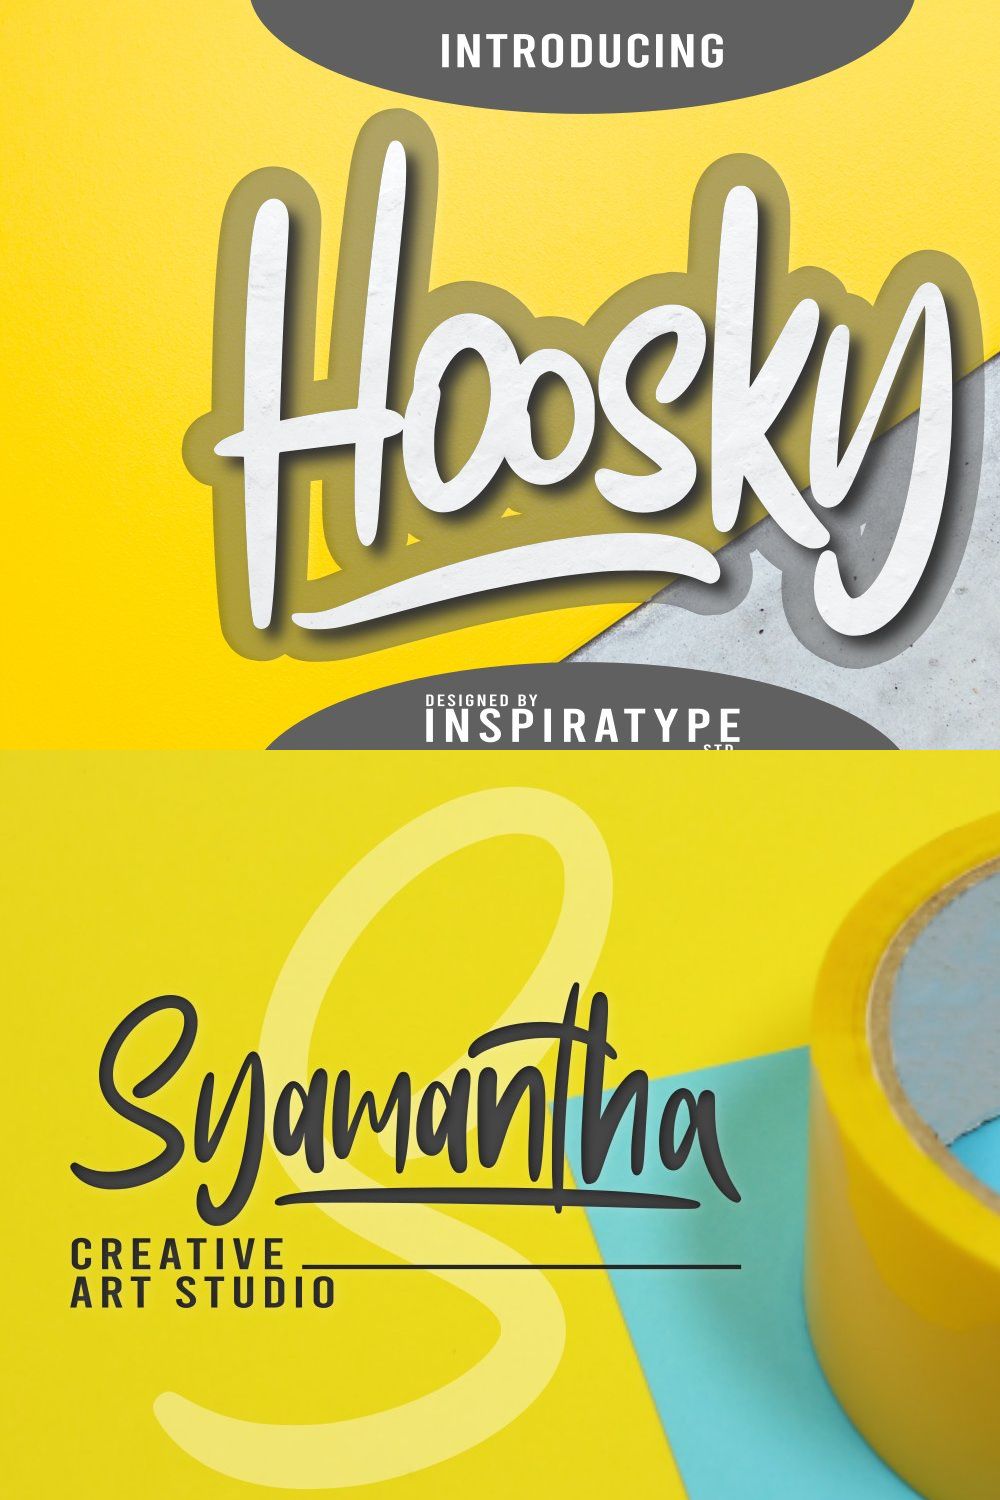 Hoosky pinterest preview image.